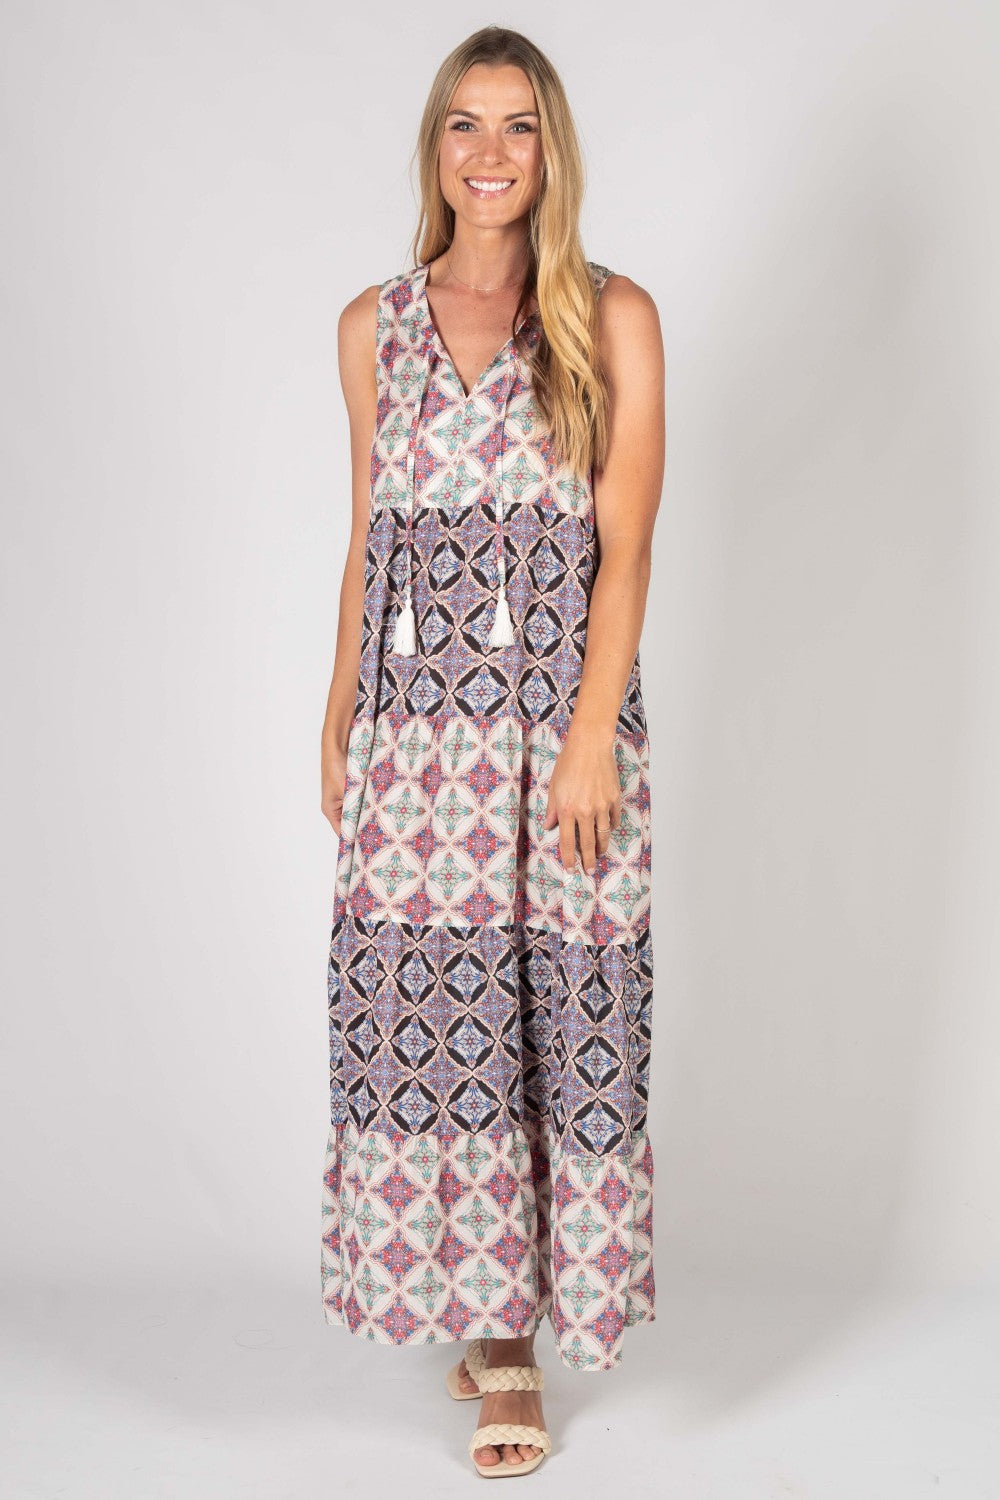 BEFORE YOU COLLECTION CONTRAST PRINT SLEEVELESS MAXI DRESS SAND